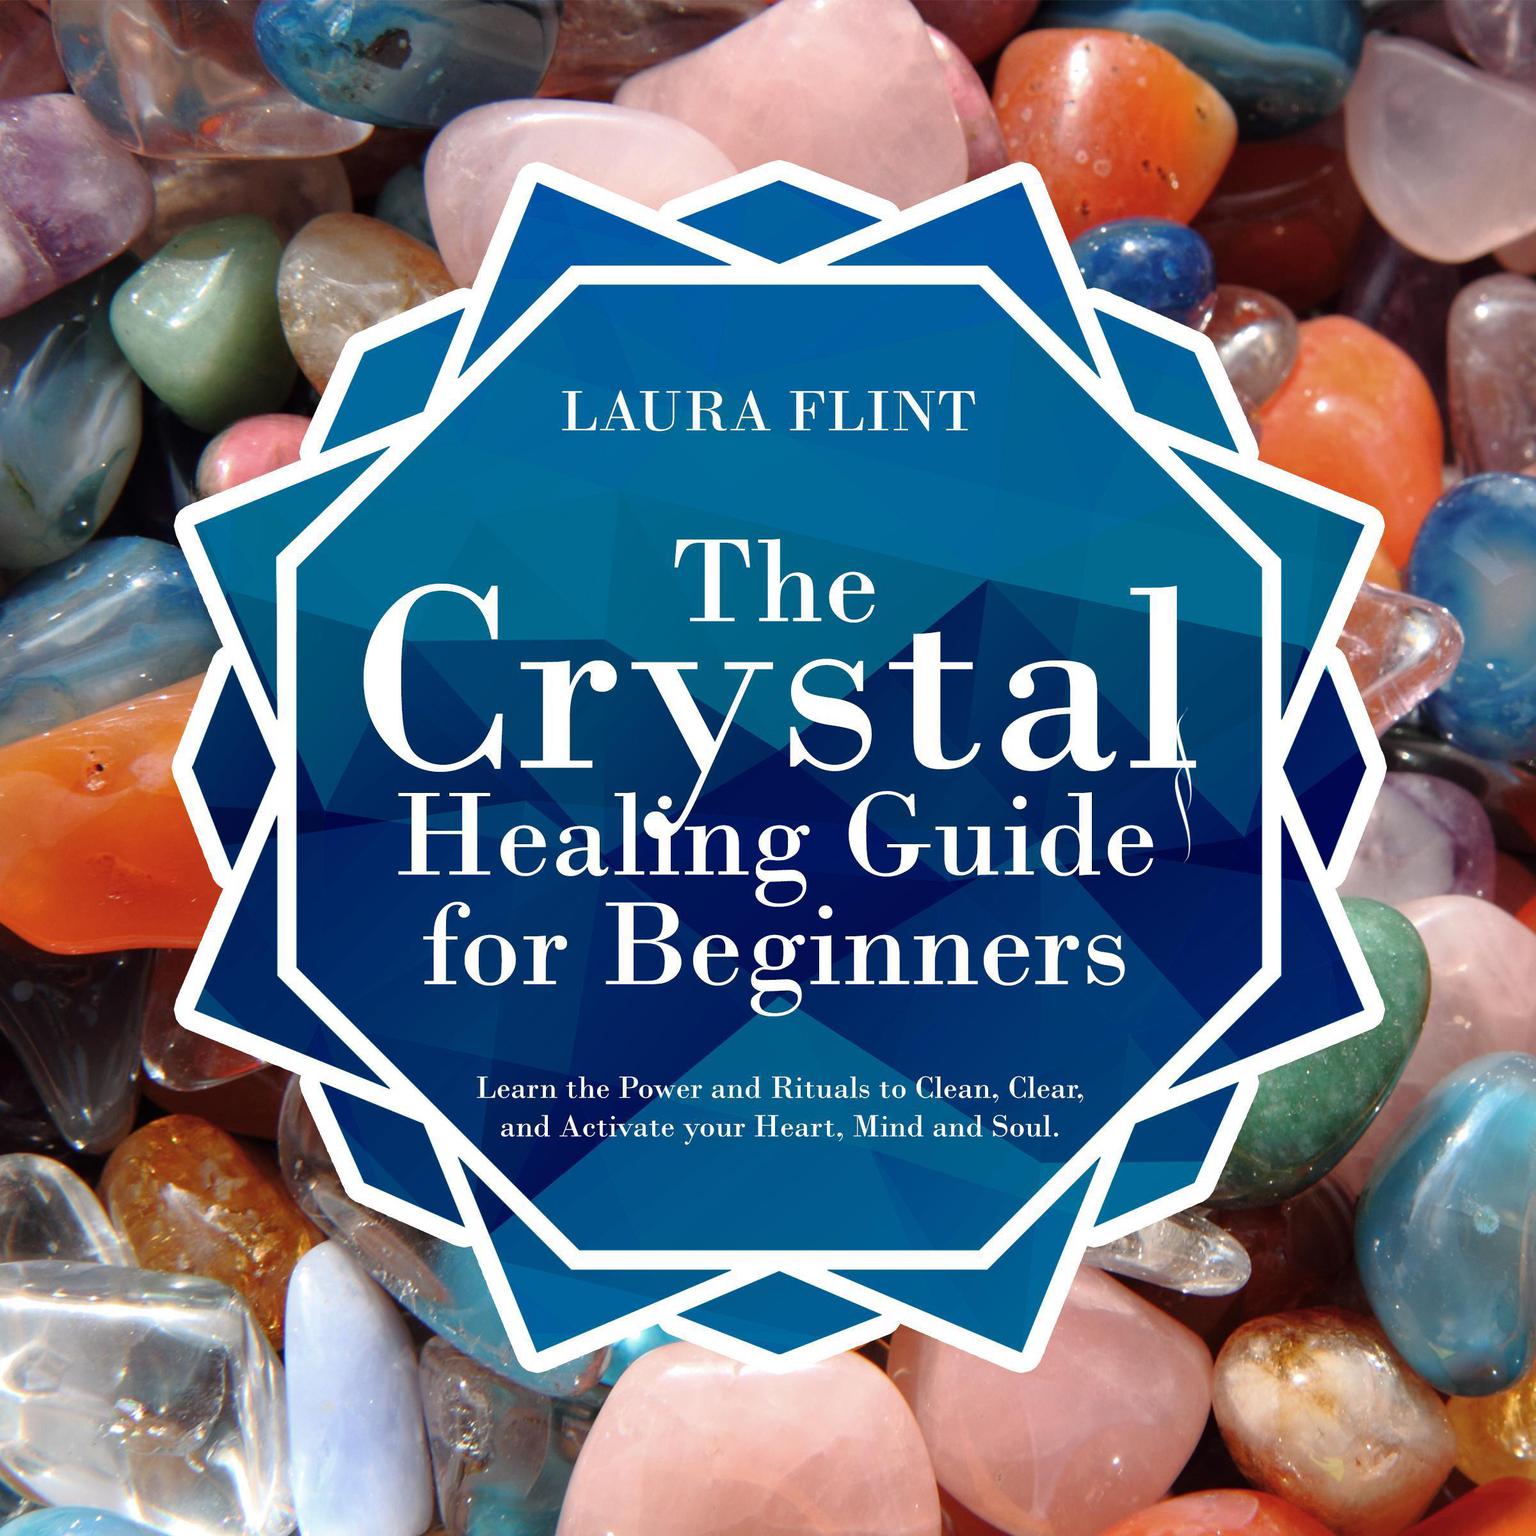 The Crystal Healing Guide for Beginners: Learn the Power and Rituals to Clean, Clear, and Activate Your Heart, Mind, and Soul Audiobook, by Laura Flint